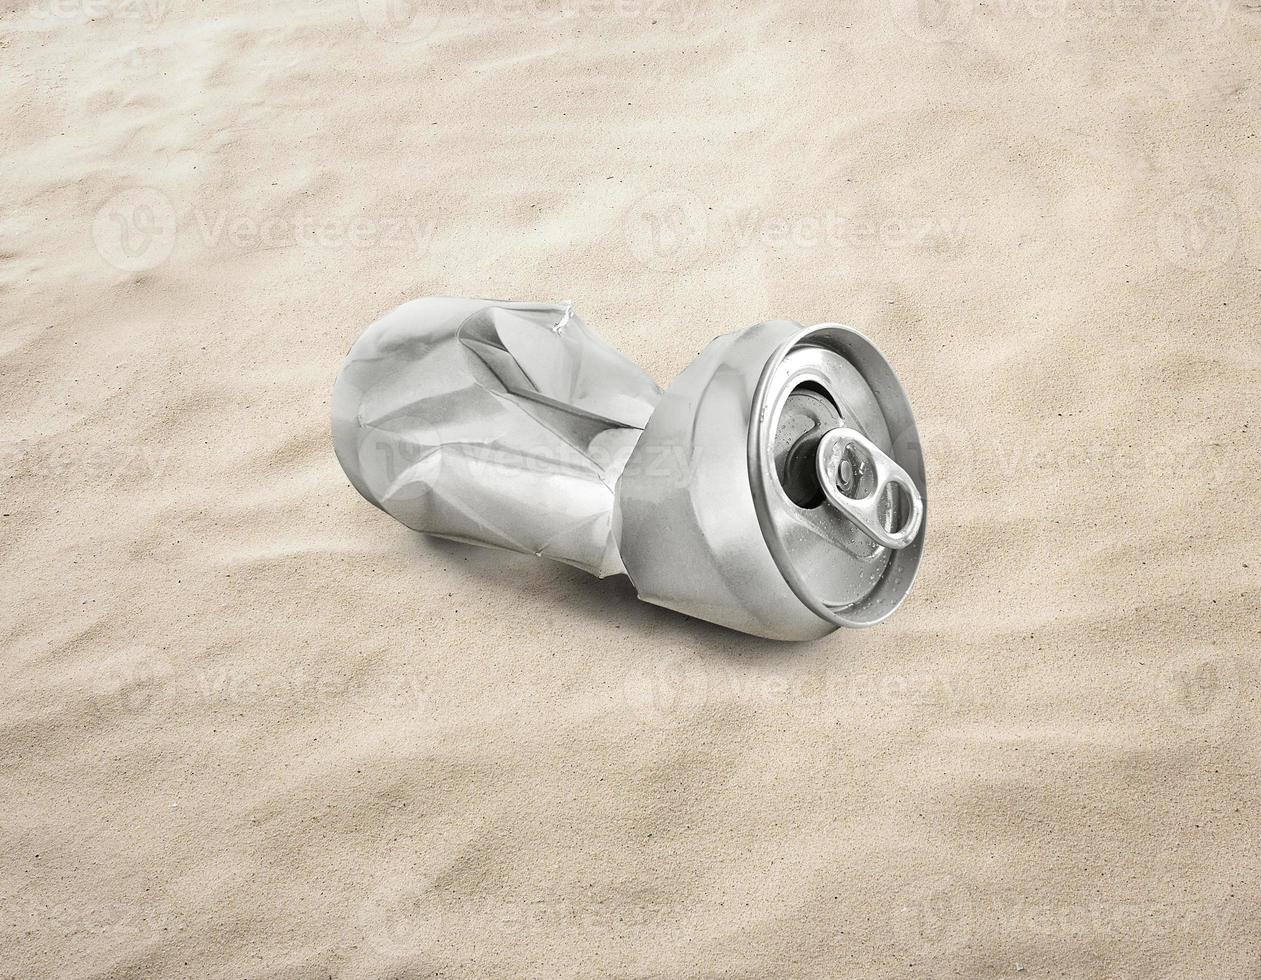 Empty soda or beer cans Crushed waste can be recycled on the sand, beach, sea photo